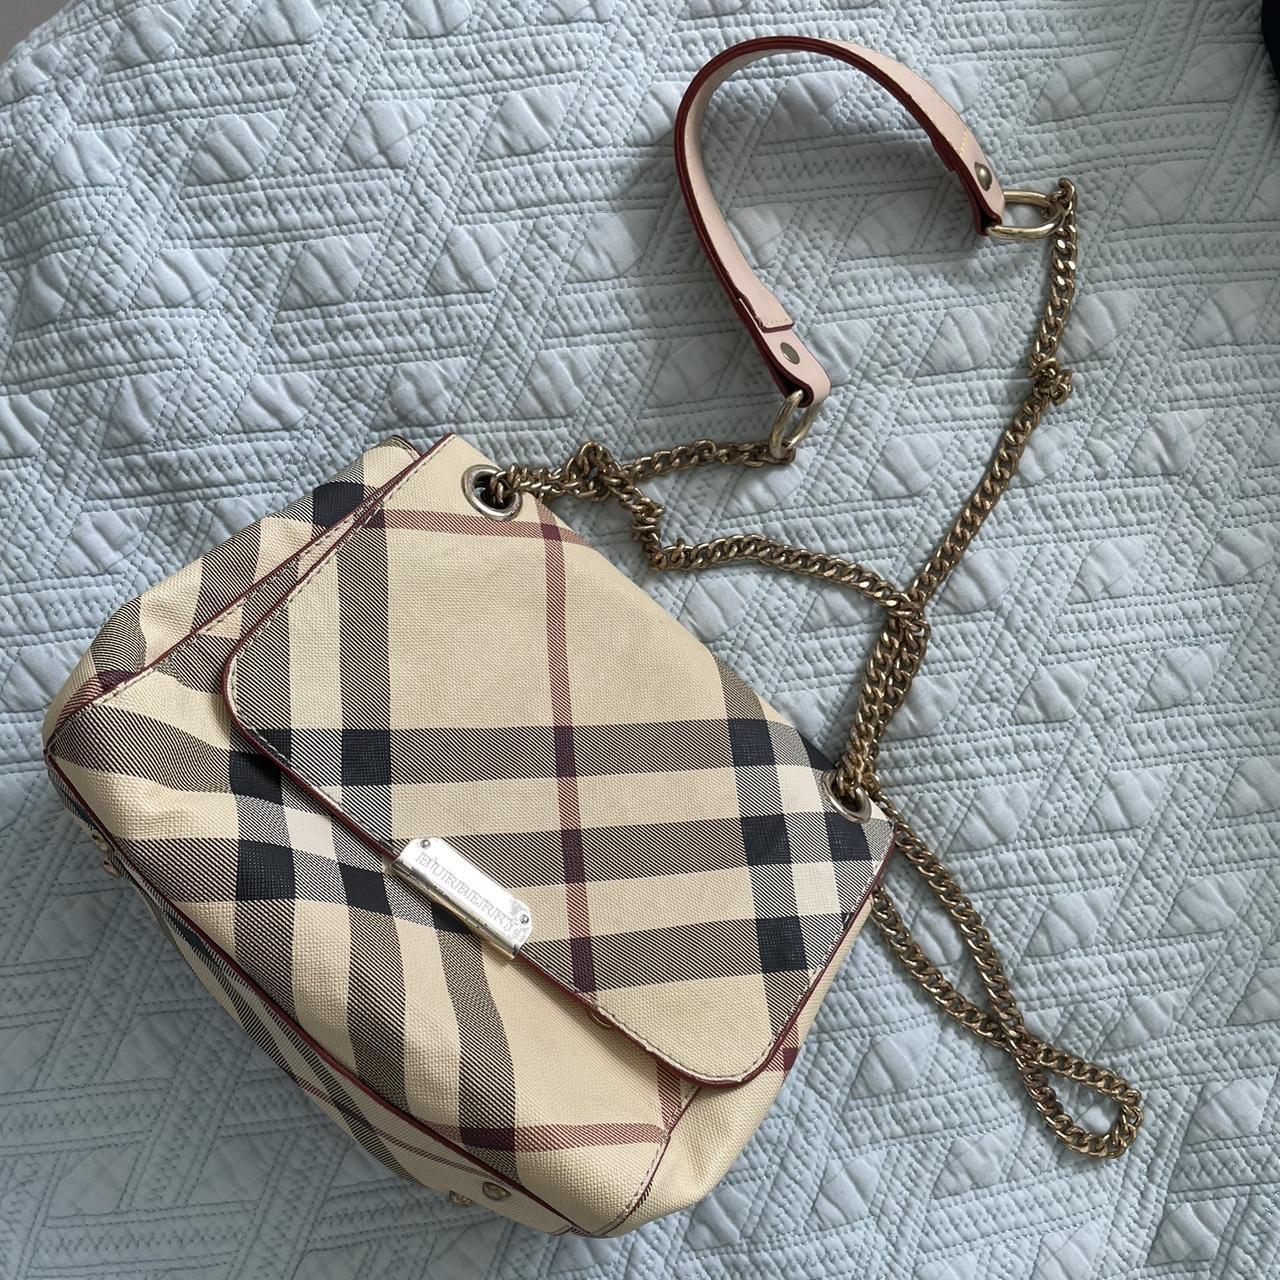 Authentic Burberry Purse has some little stain shown - Depop